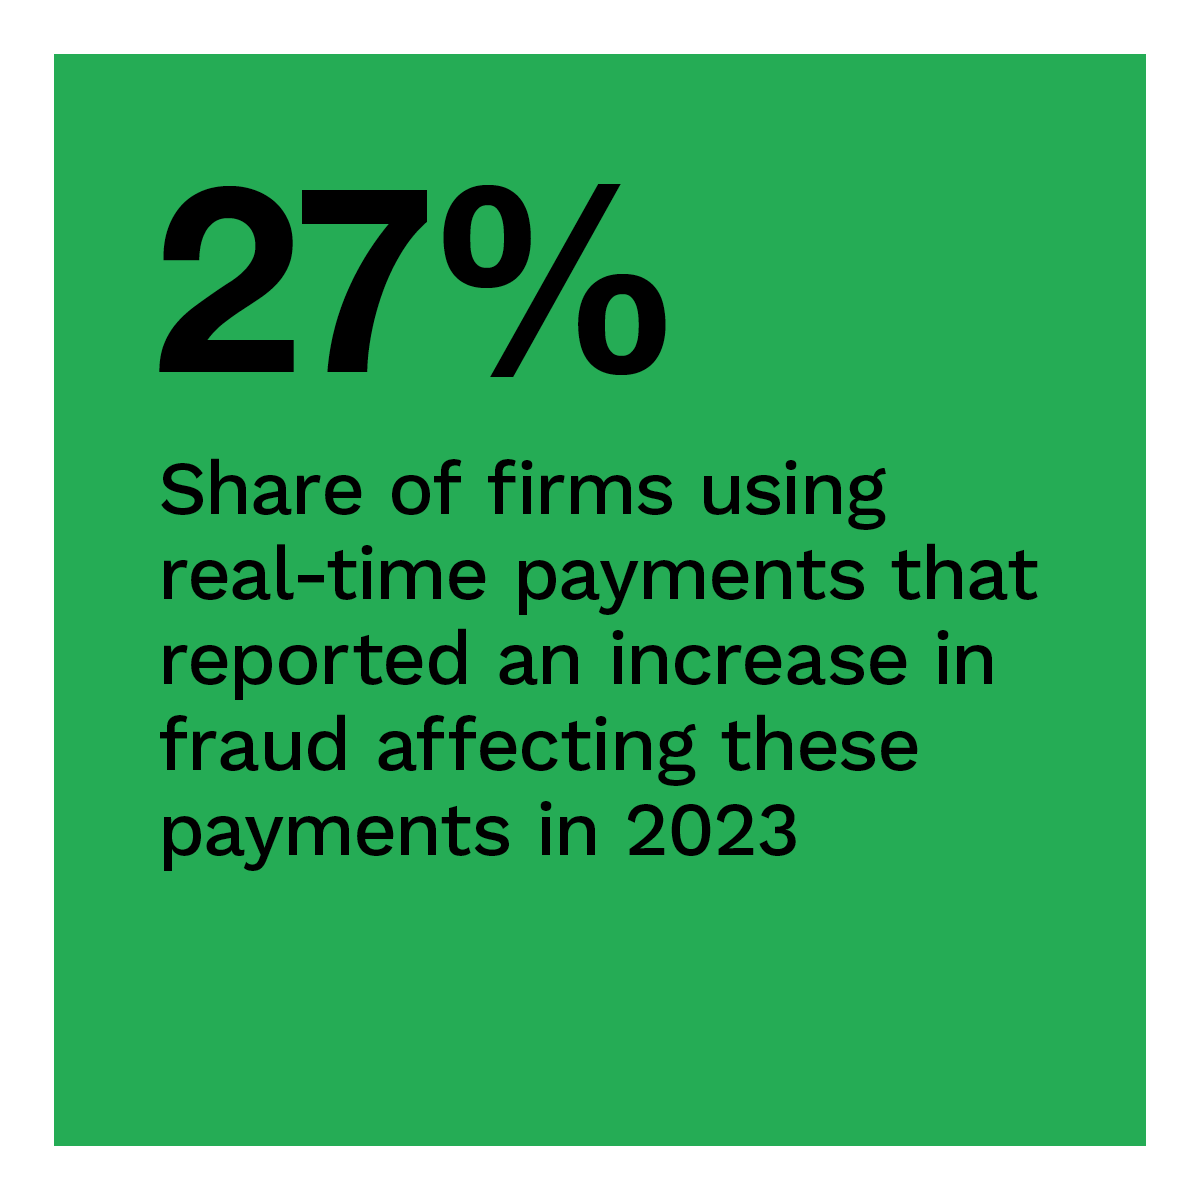  Share of firms using real-time payments that reported an increase in fraud affecting these payments in 2023